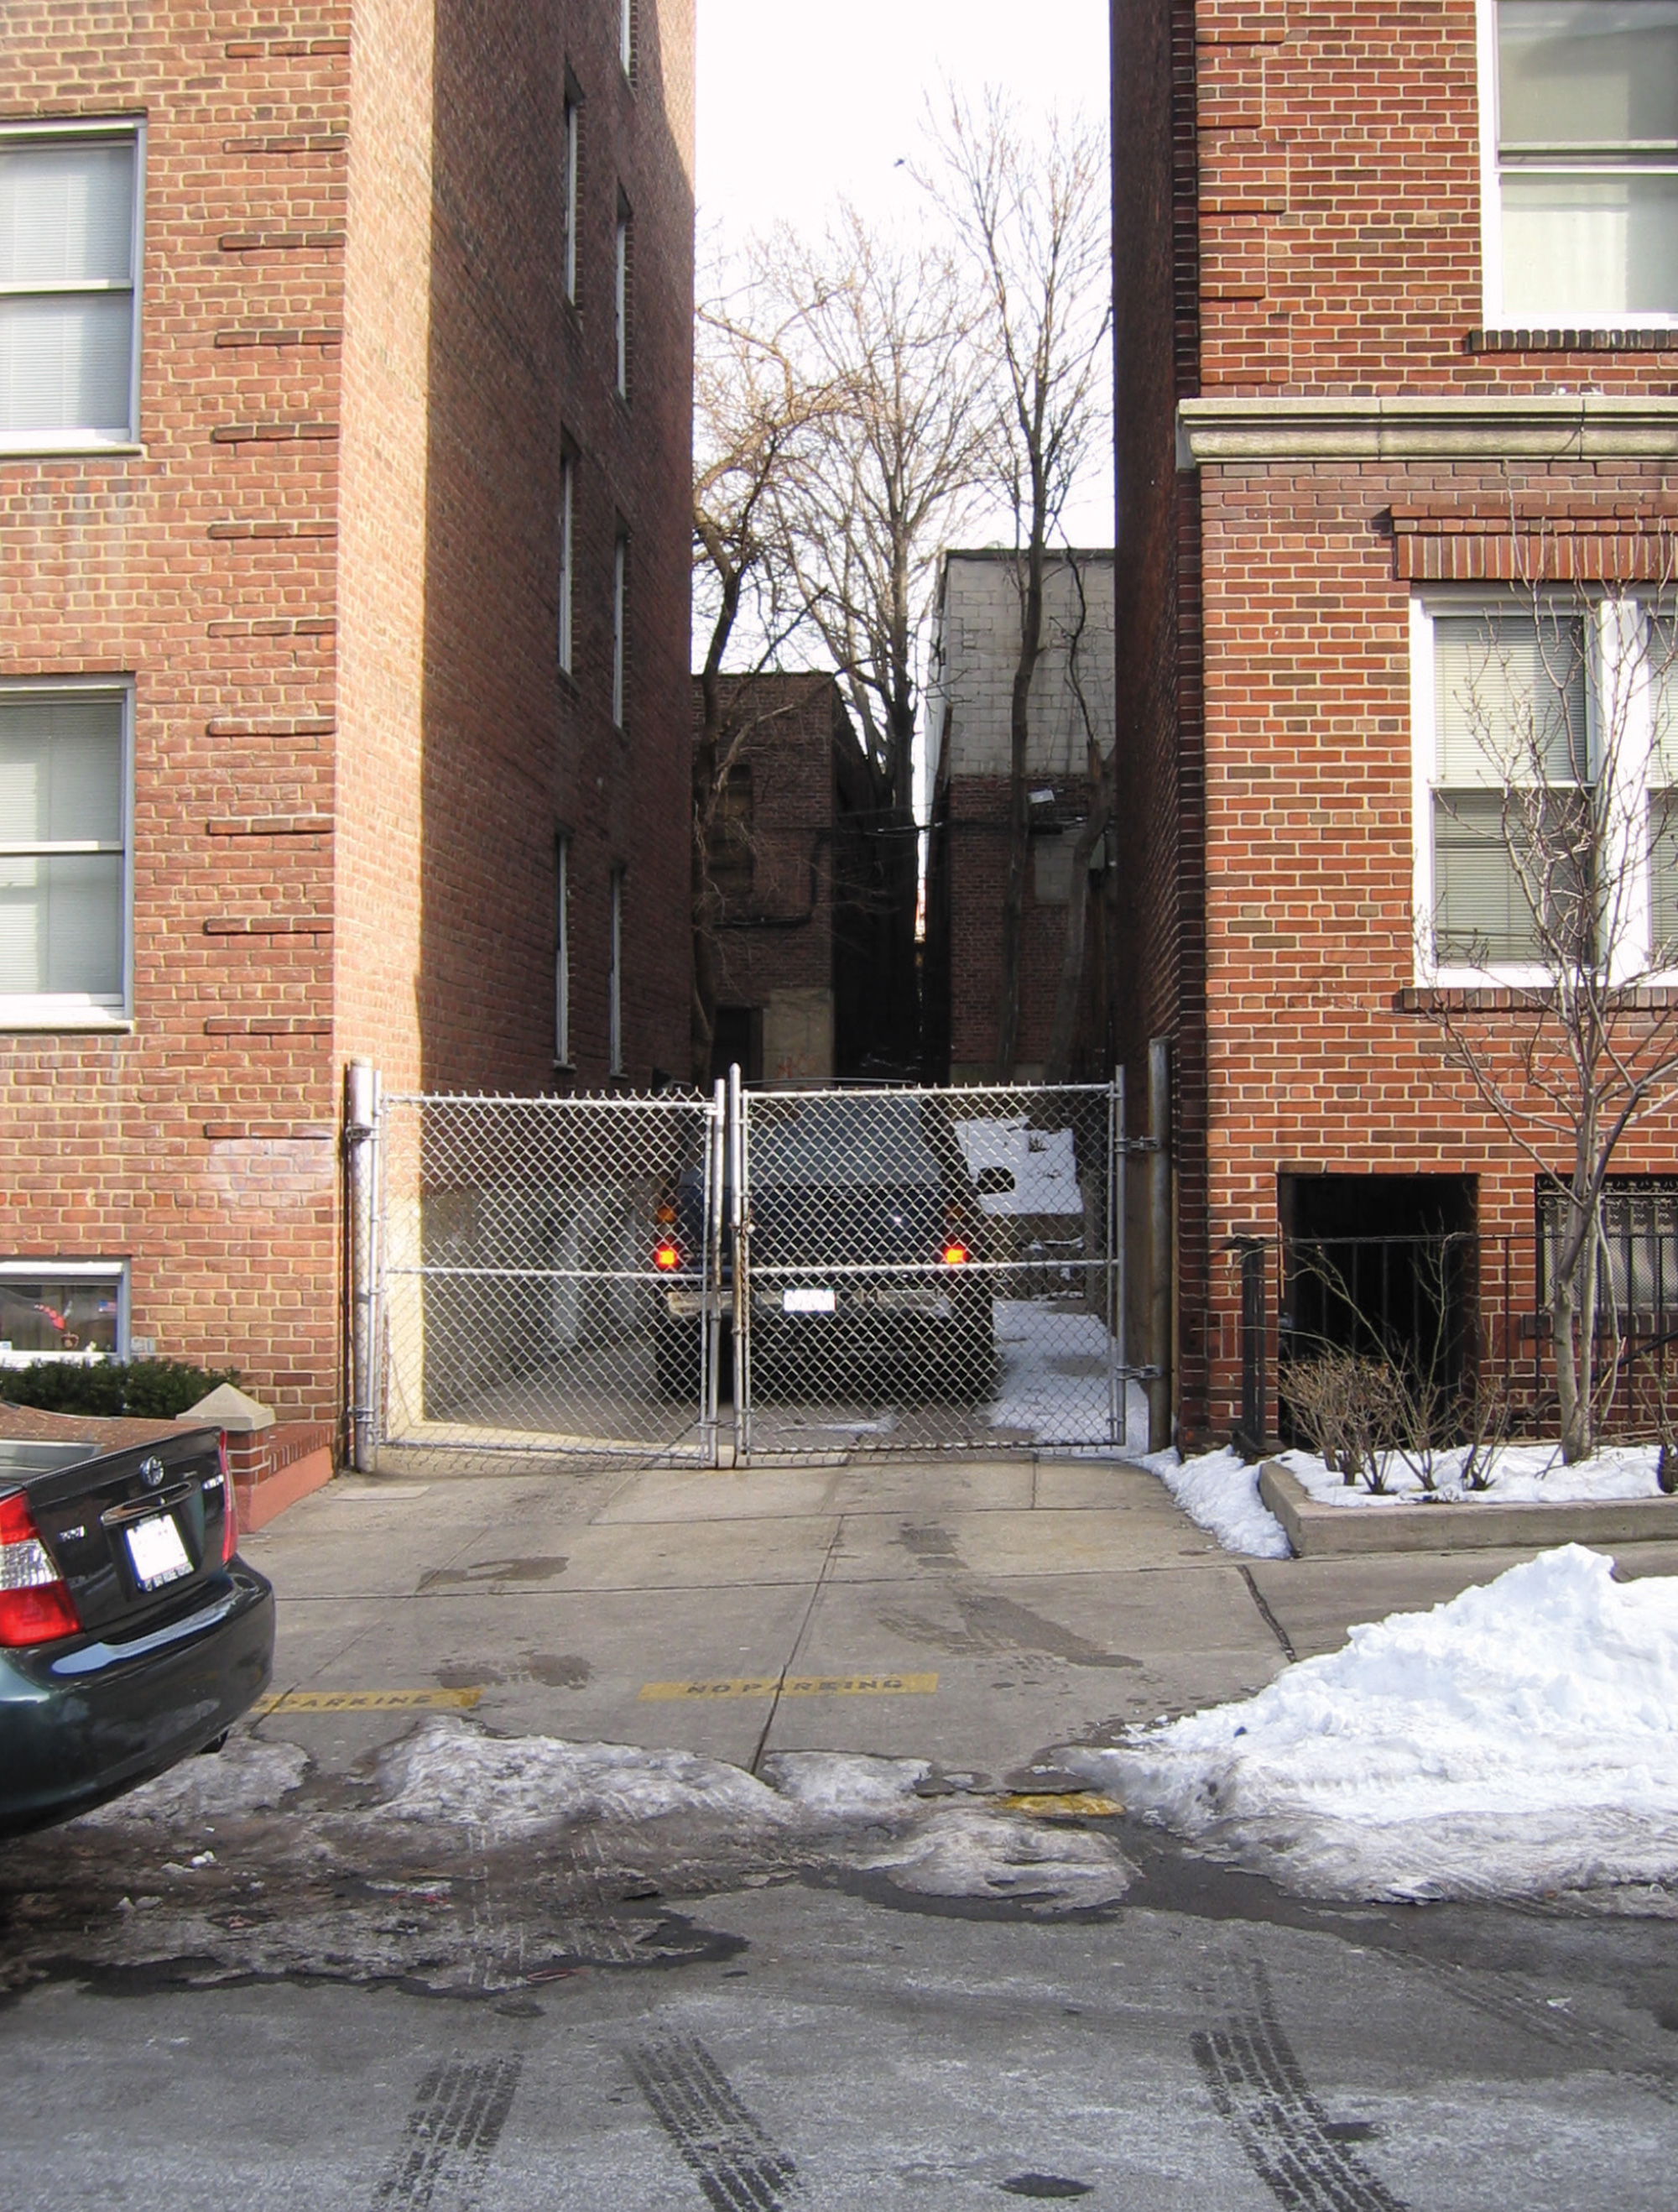 3. Block 2497, lot 42, Queens
Between 69th St & 70th St on 53rd Drive